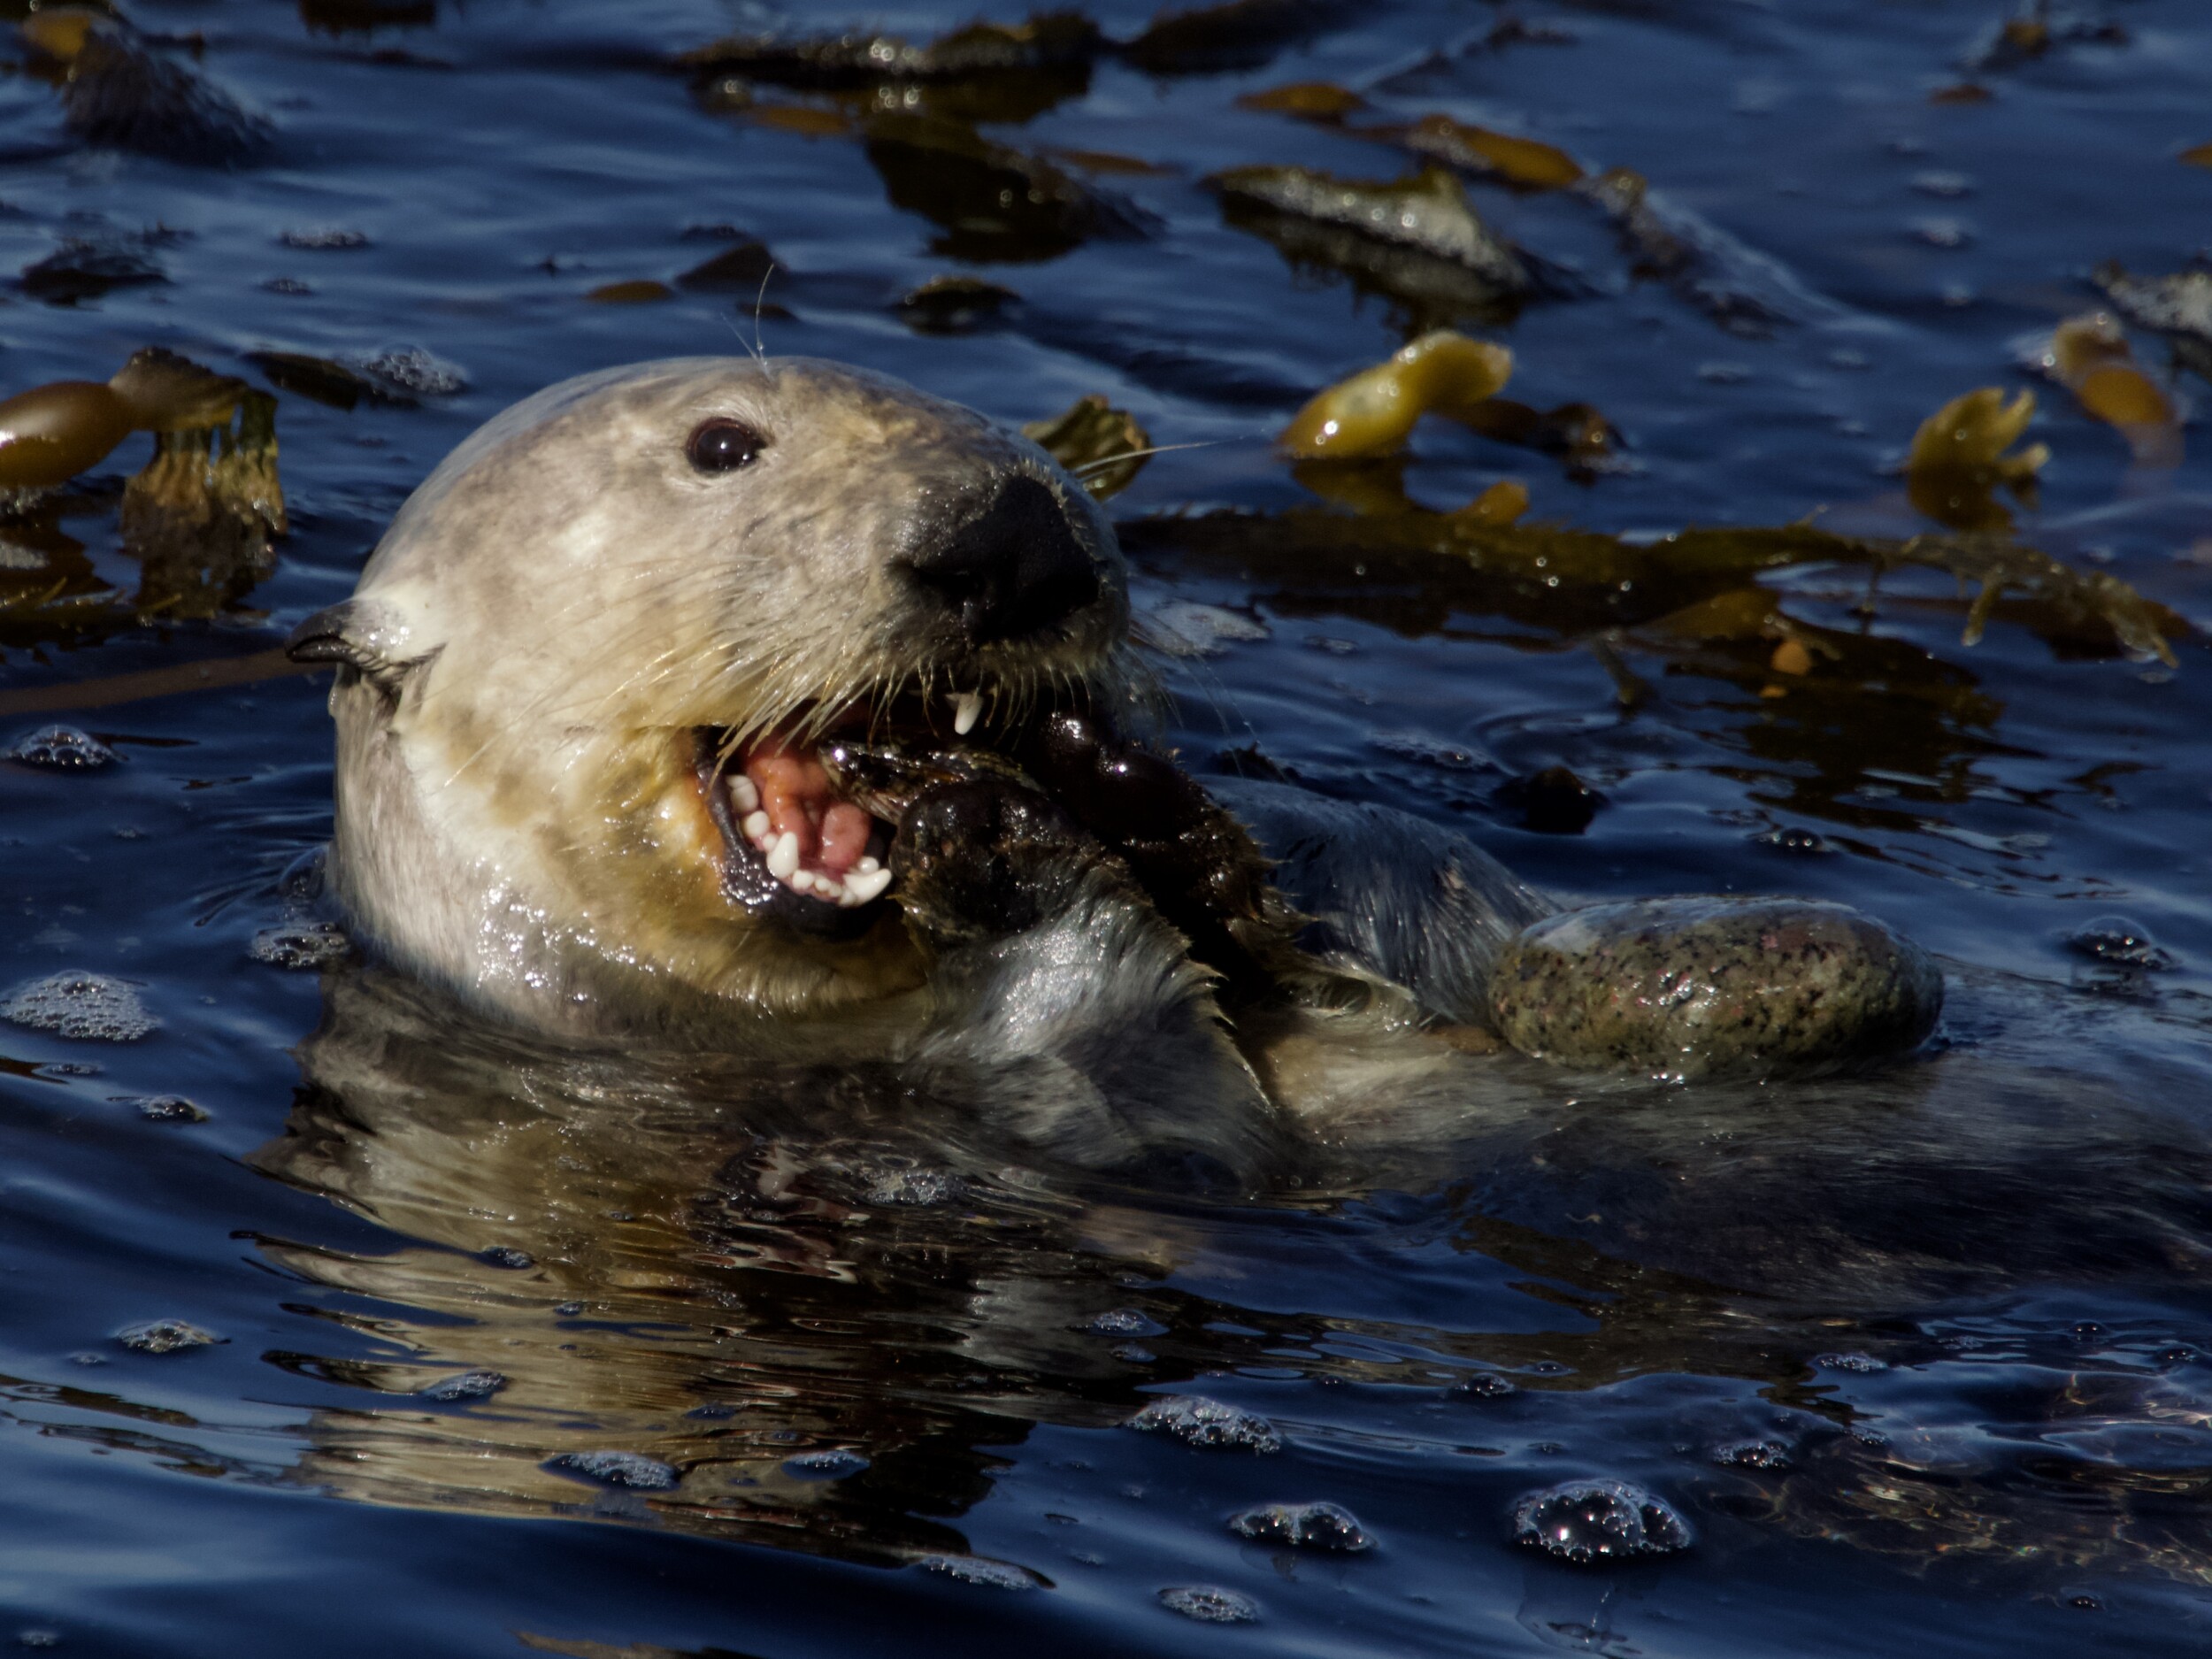 Southern Sea Otter Eating Mollusk in Monterey Bay